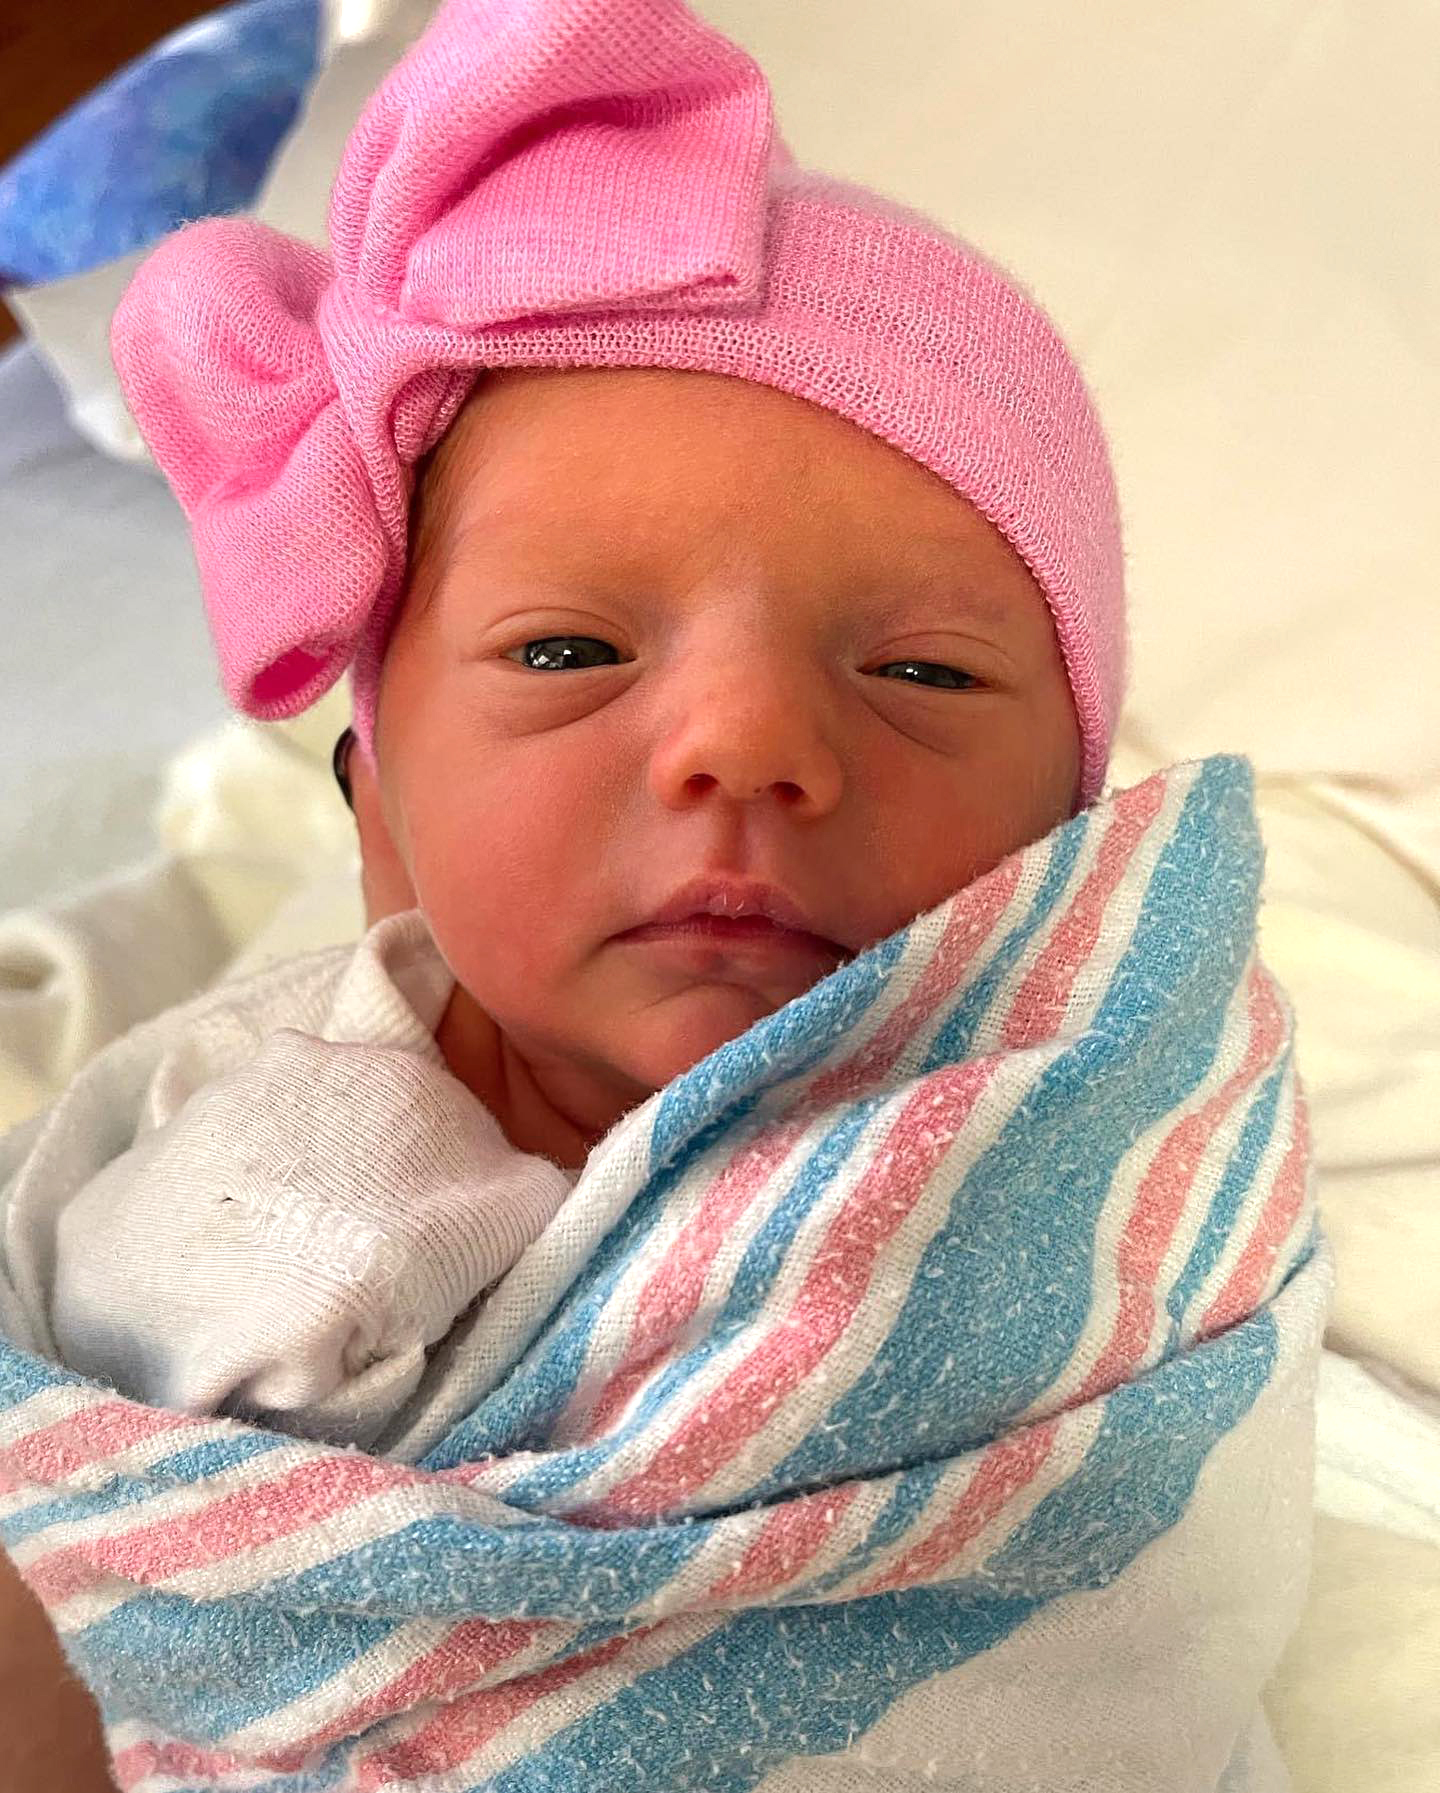 Vicki Gunvalson’s Daughter Briana Culberson Gives Birth, Welcomes 4th Baby With Husband Ryan Culberson